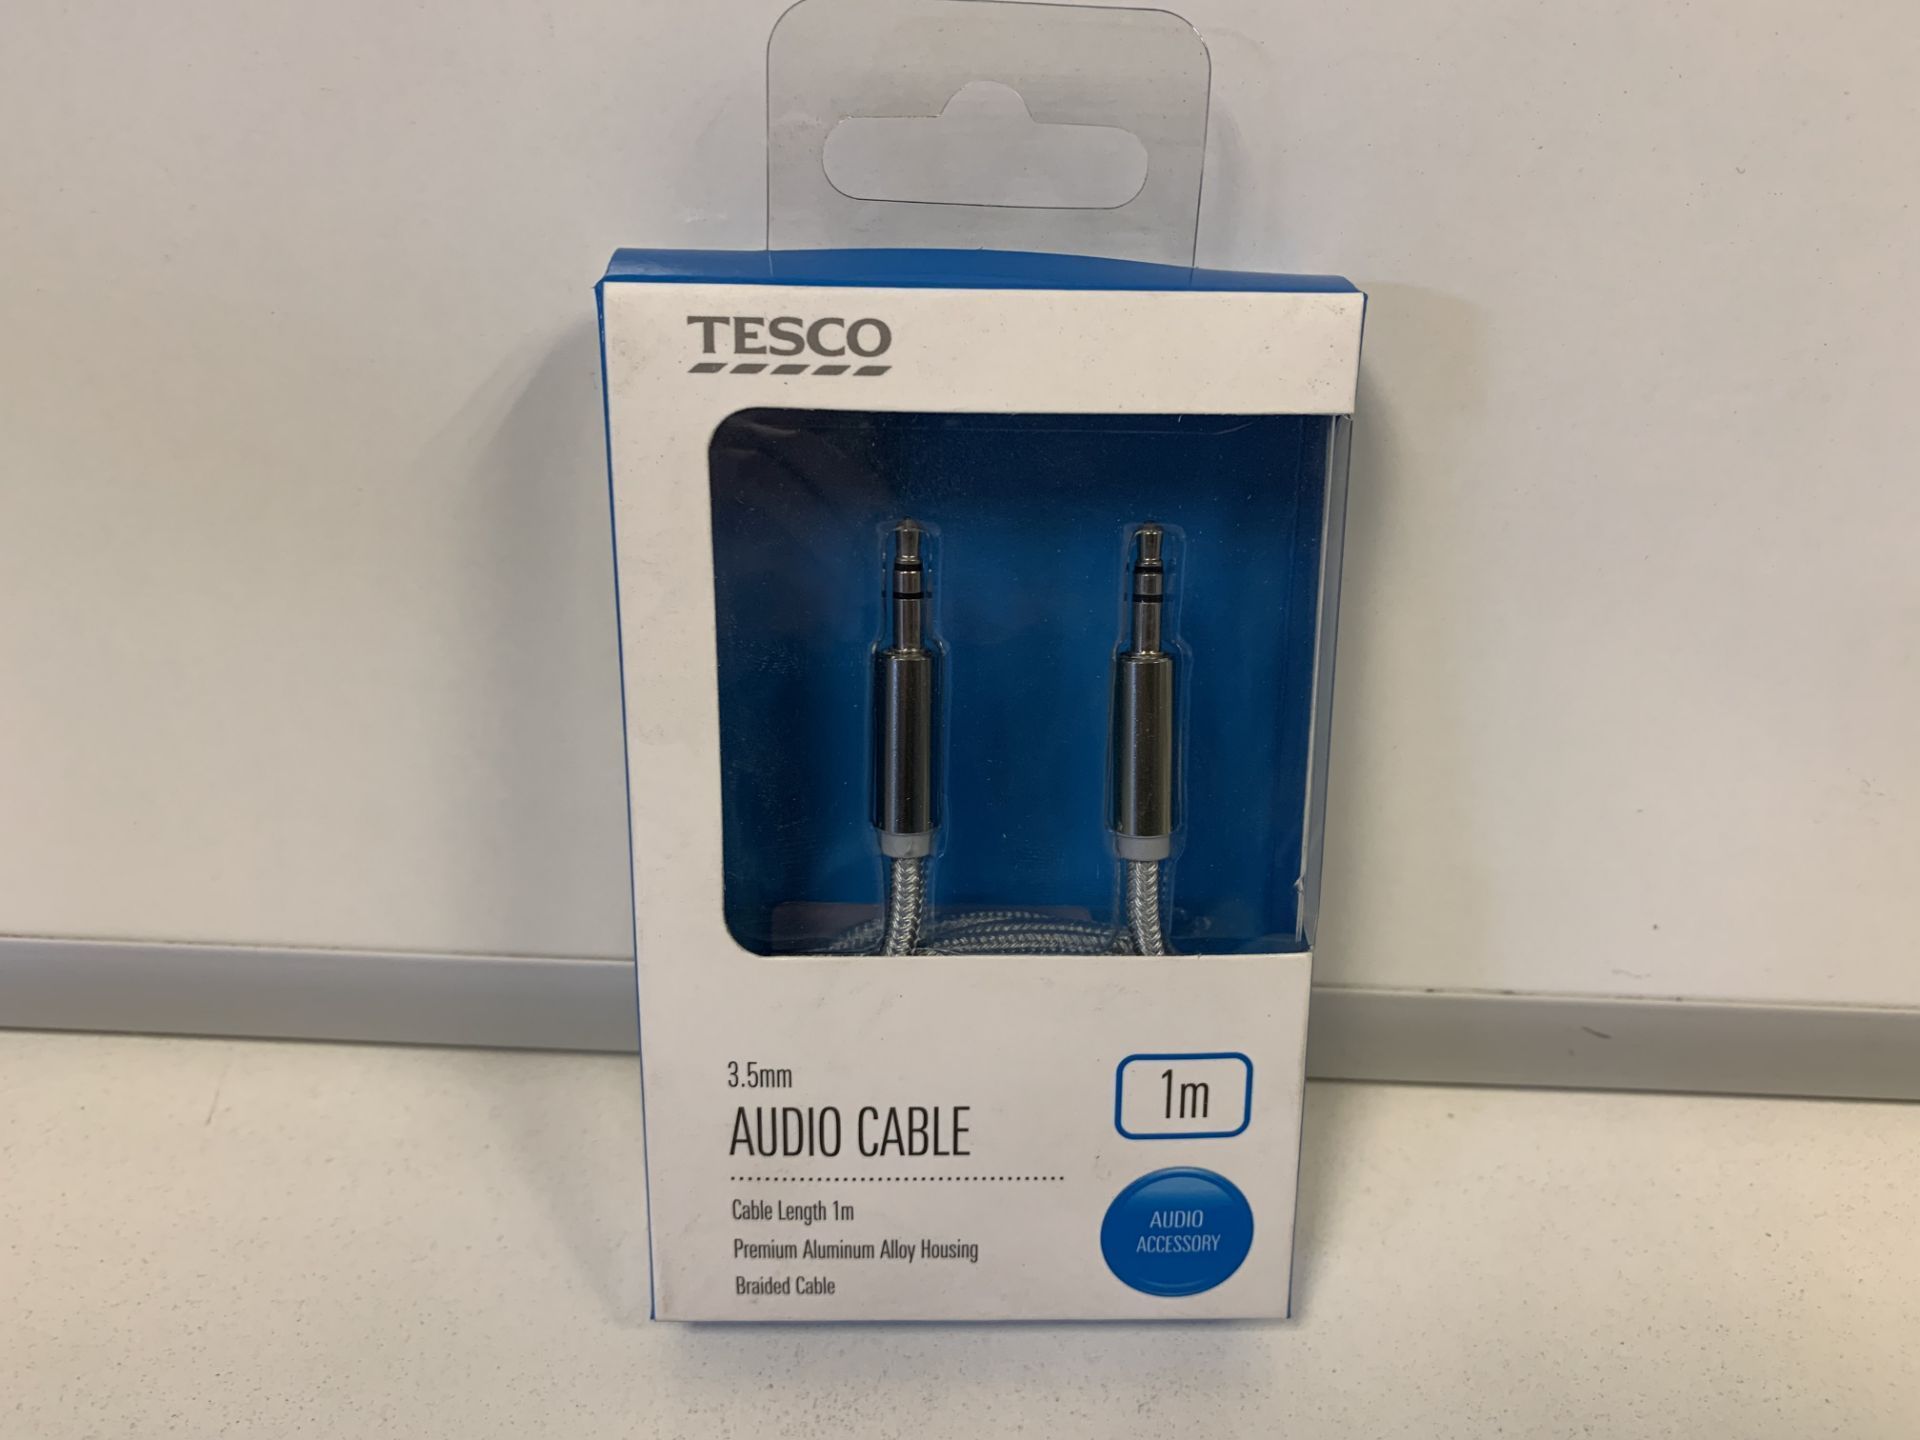 80 X BRAND NEW TESCO 3.5MM AUDIO CABLES 1M IN 2 BOXES (194/23)